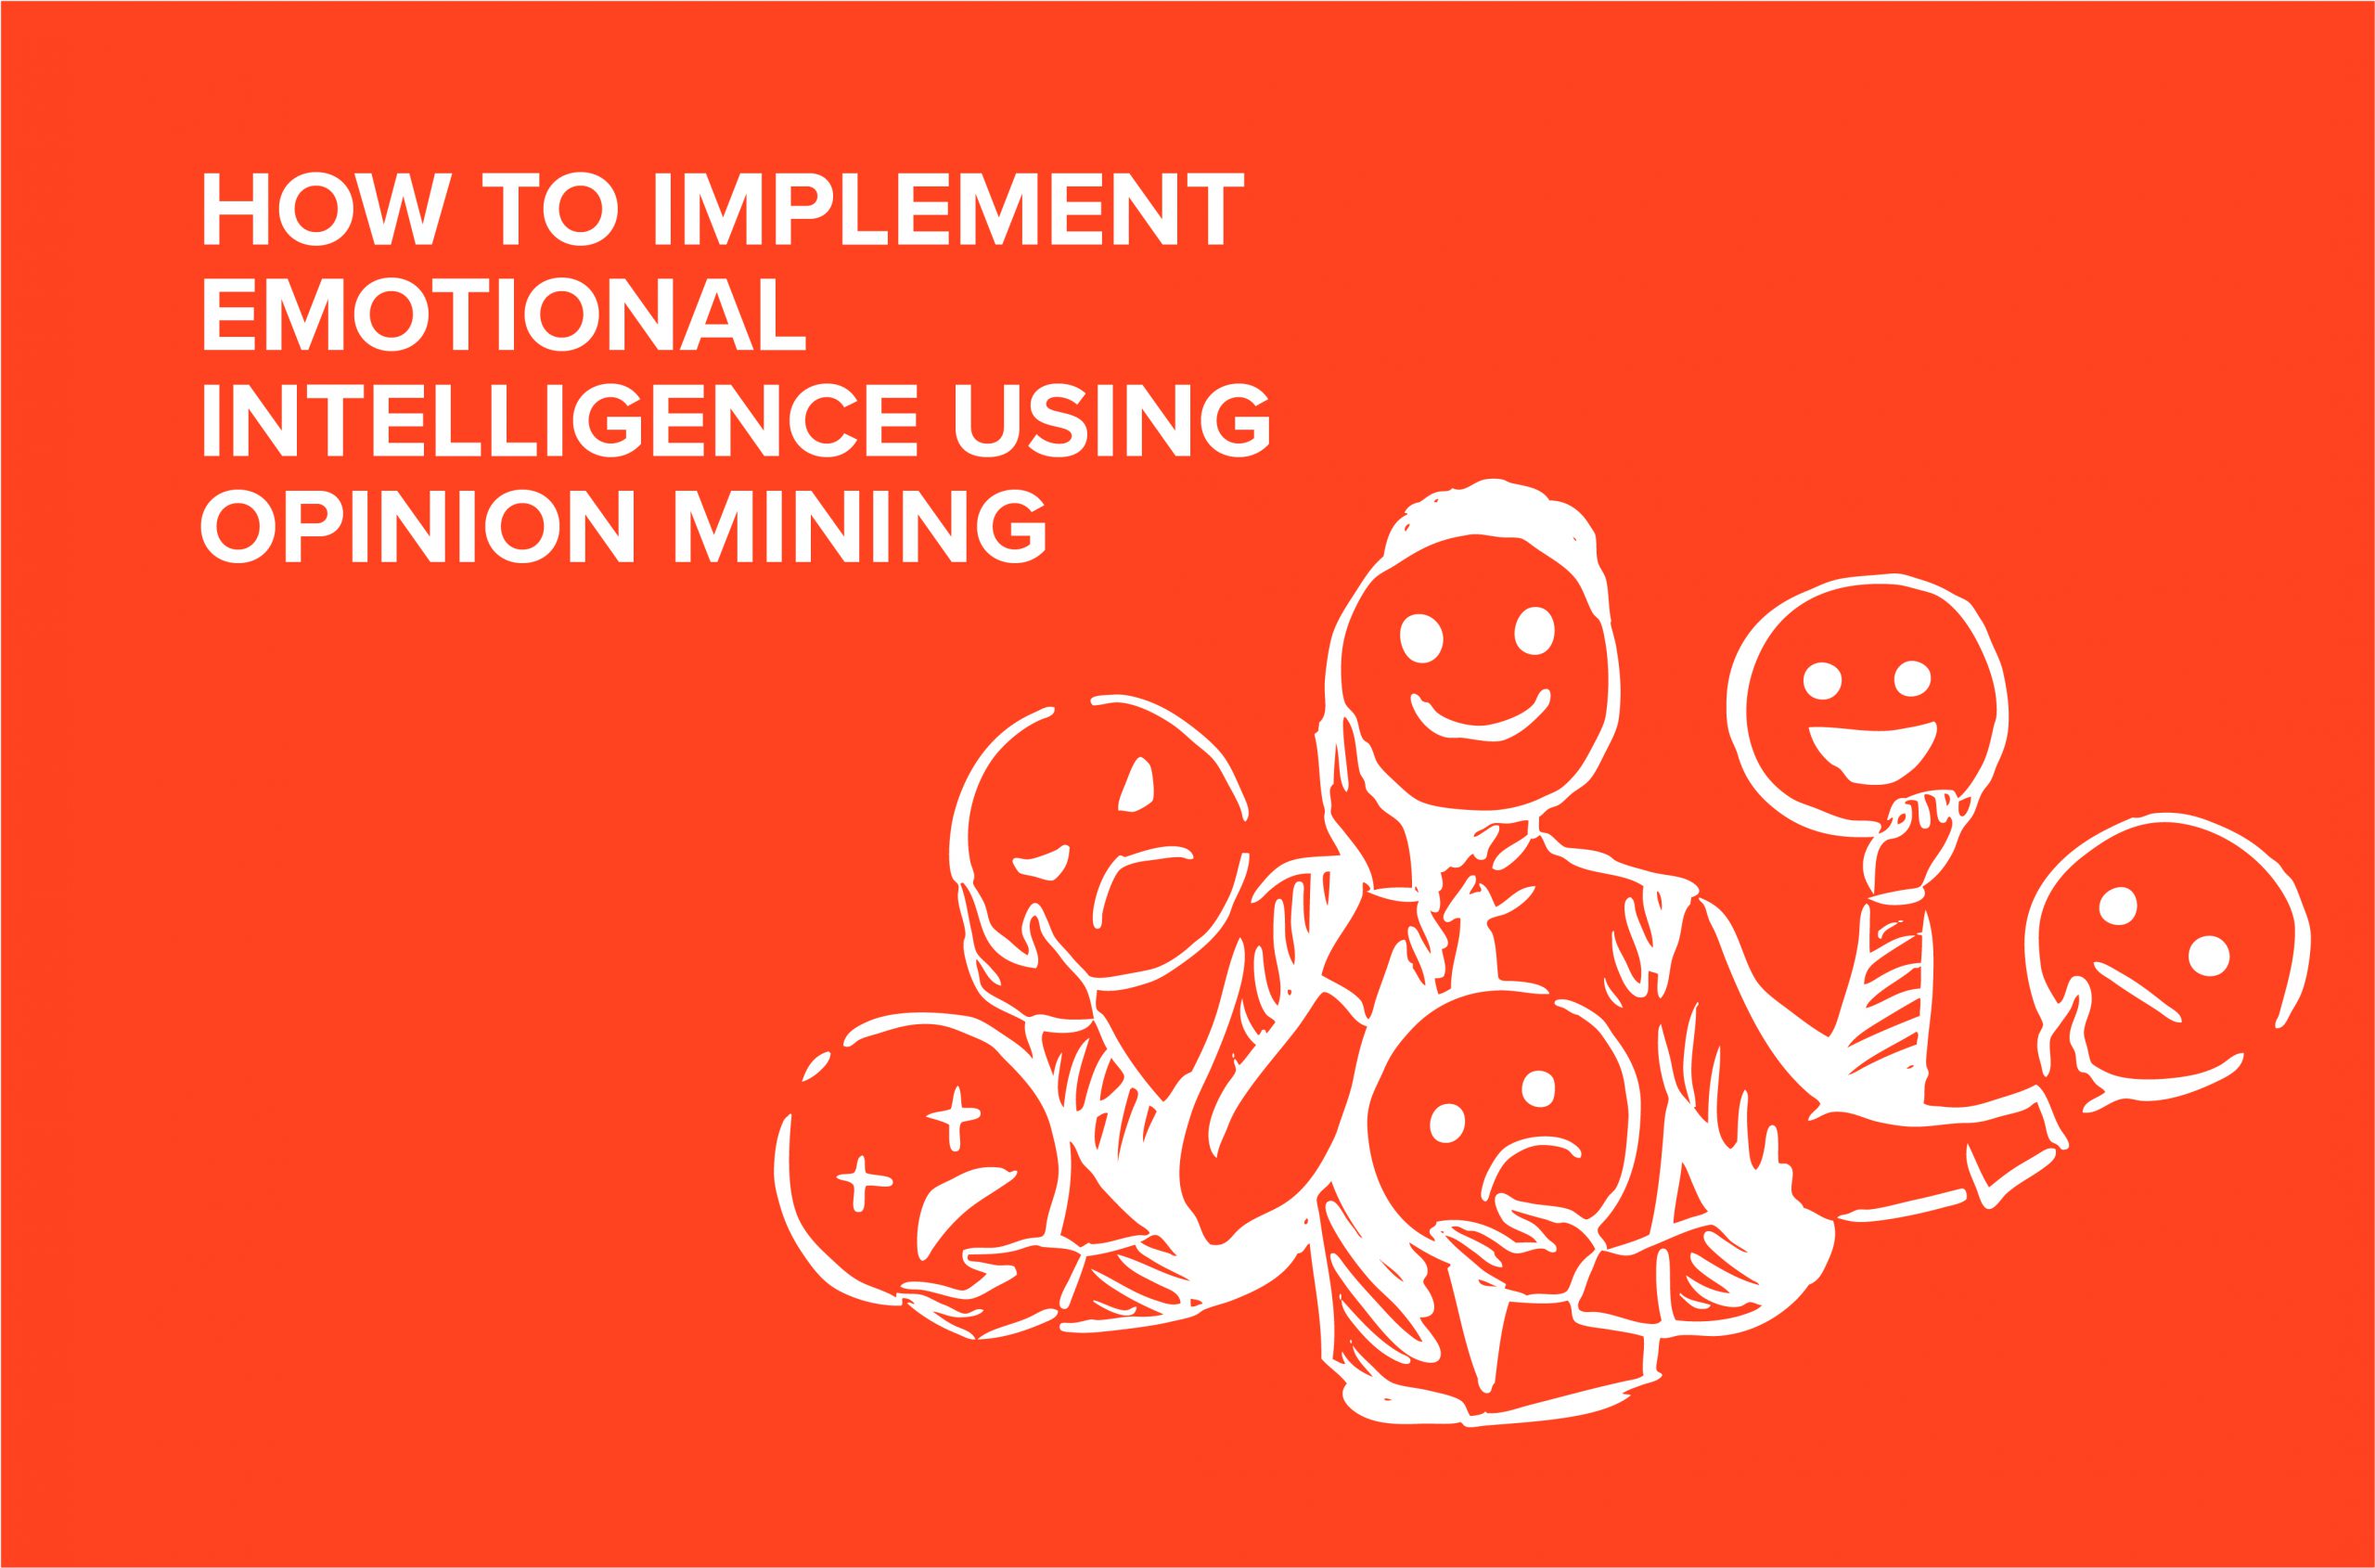 How to Implement Emotional Intelligence Using Opinion Mining